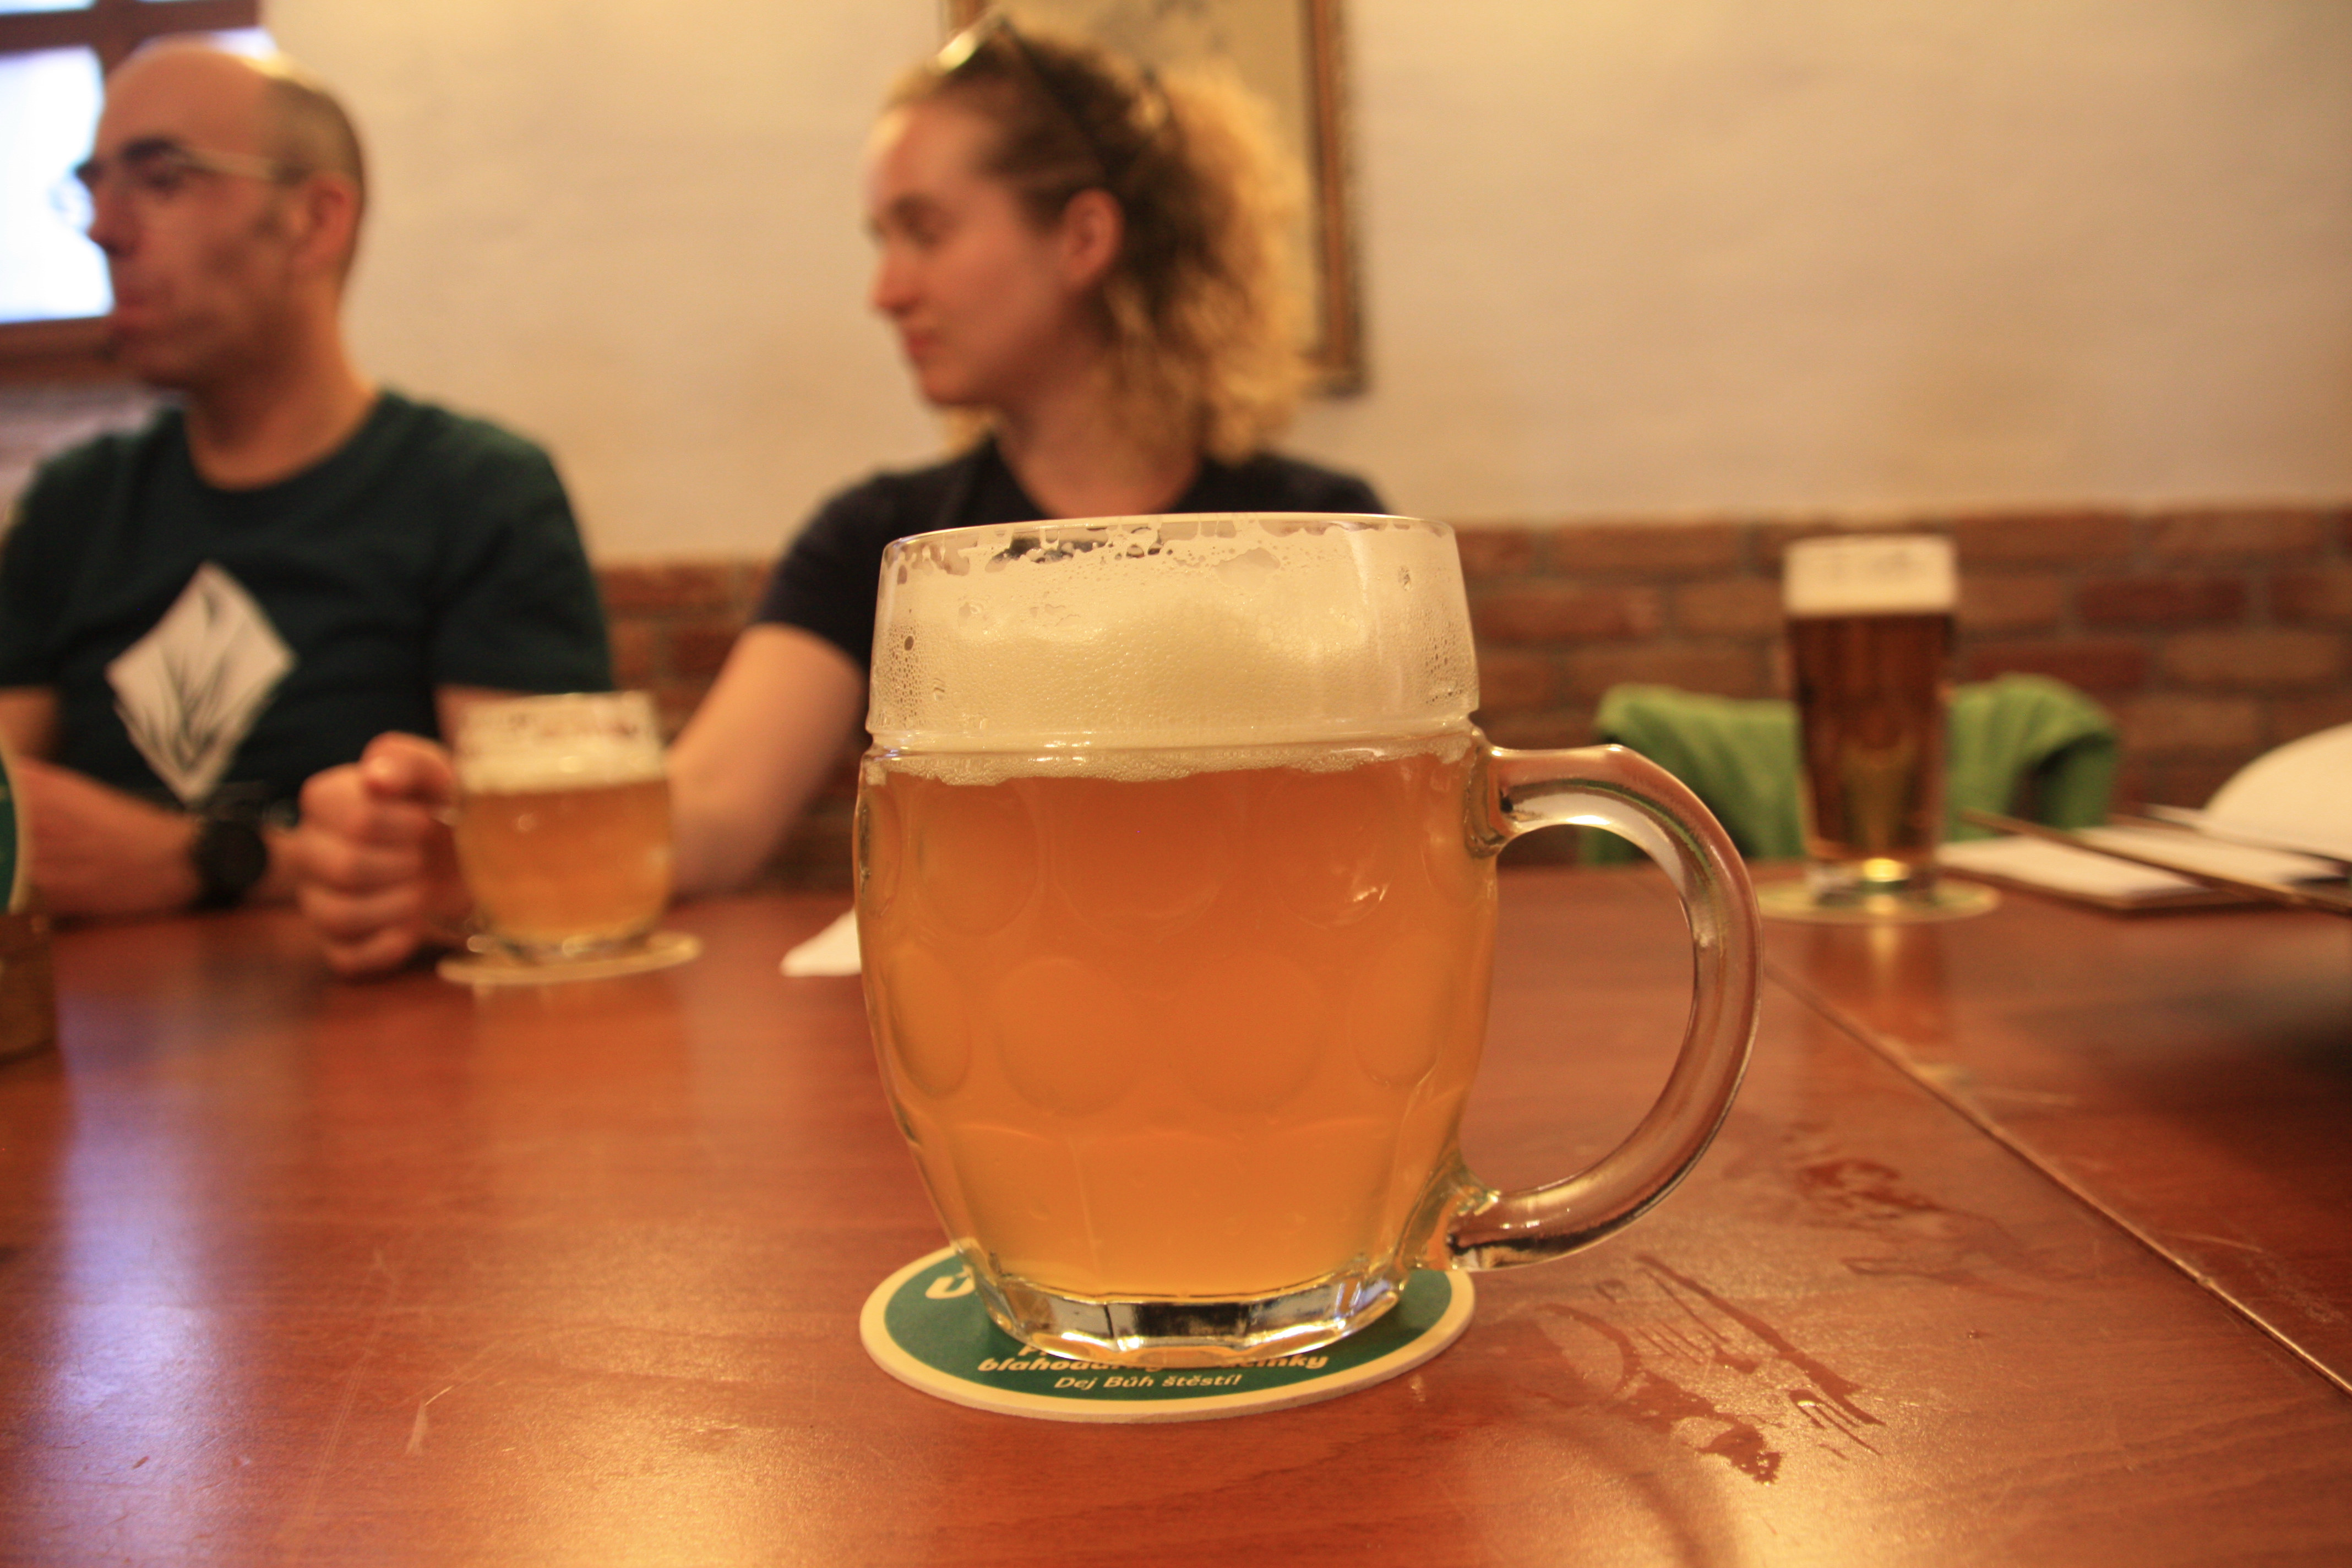 Beer at Únětický pivovar, a 300-year-old brewery, after a day of hard work